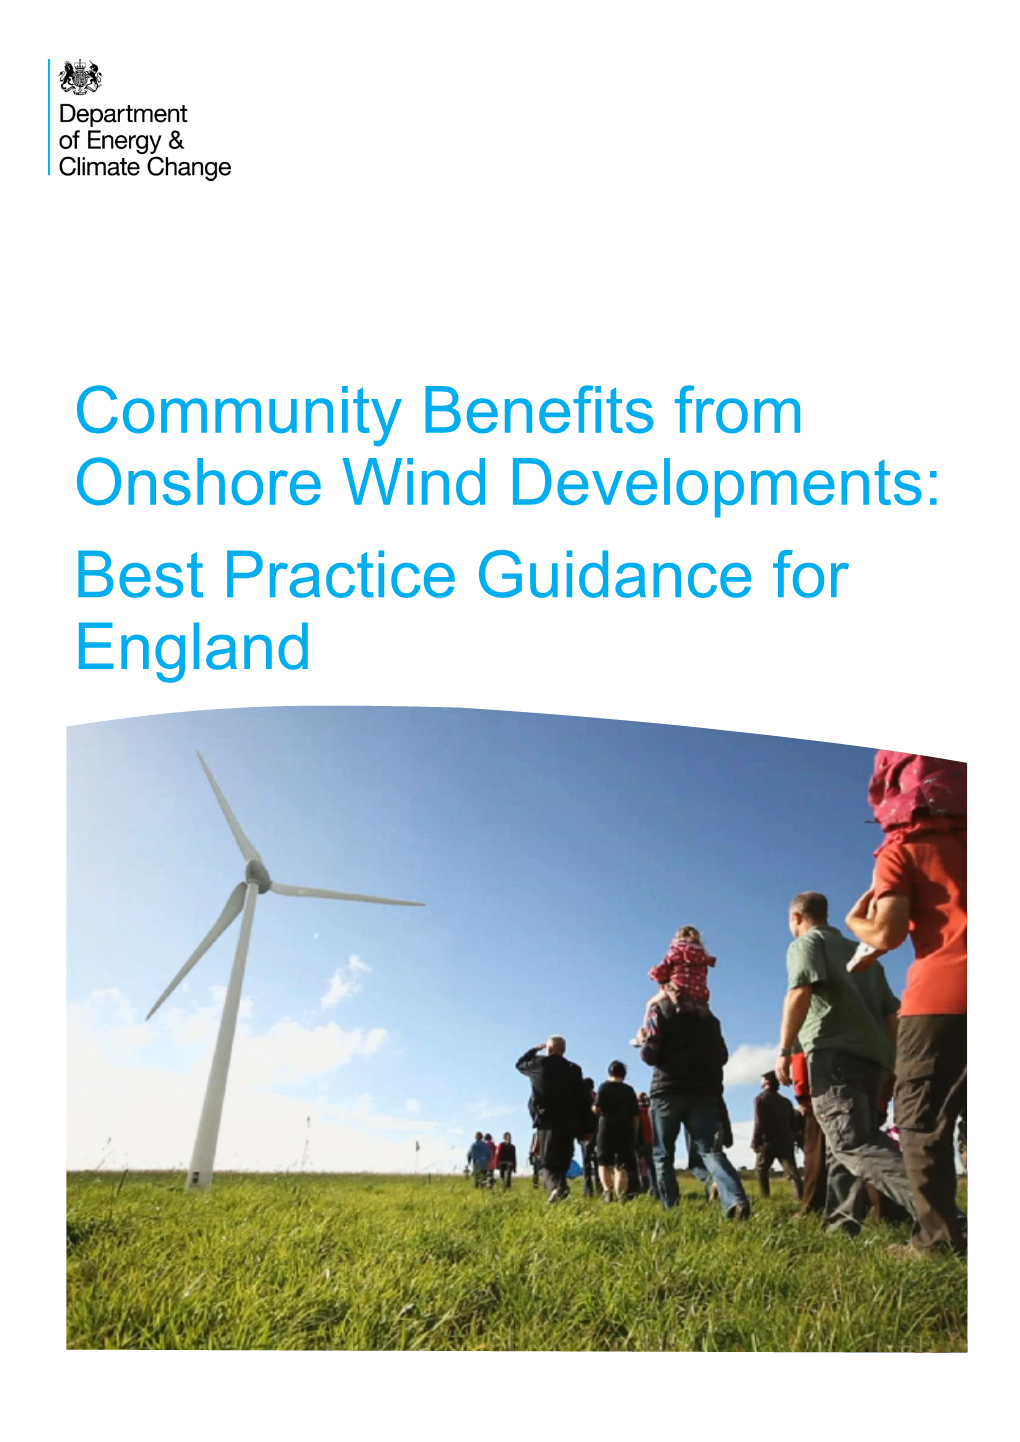 Community Benefits from Onshore Wind Developments: Best Practice Guidance for England